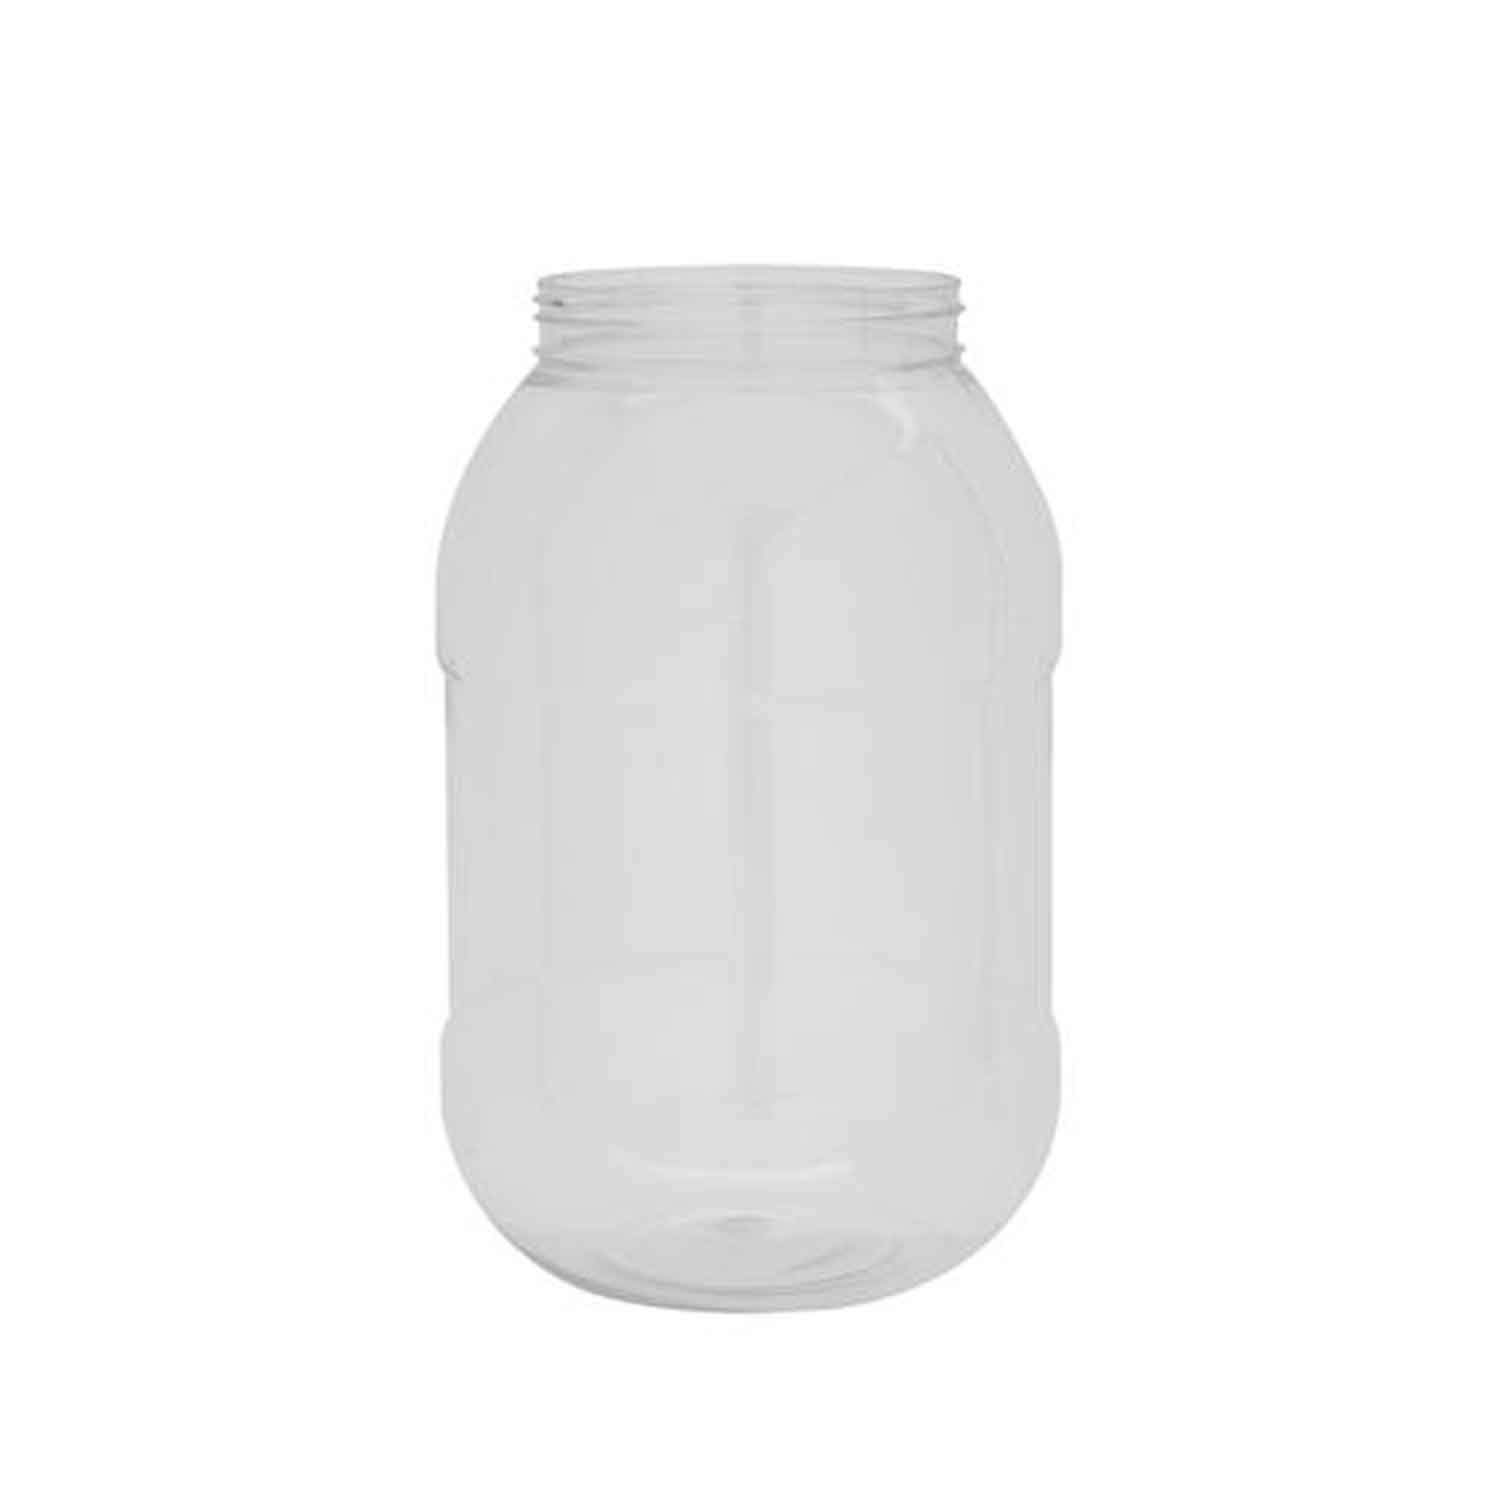 Royalford 5L Round Pet Jar With Cap, Plastic Container - Easy Store Jar To Keep Spices, Dry Fruits, Raisins, Chocolates, Ideal For Kitchen